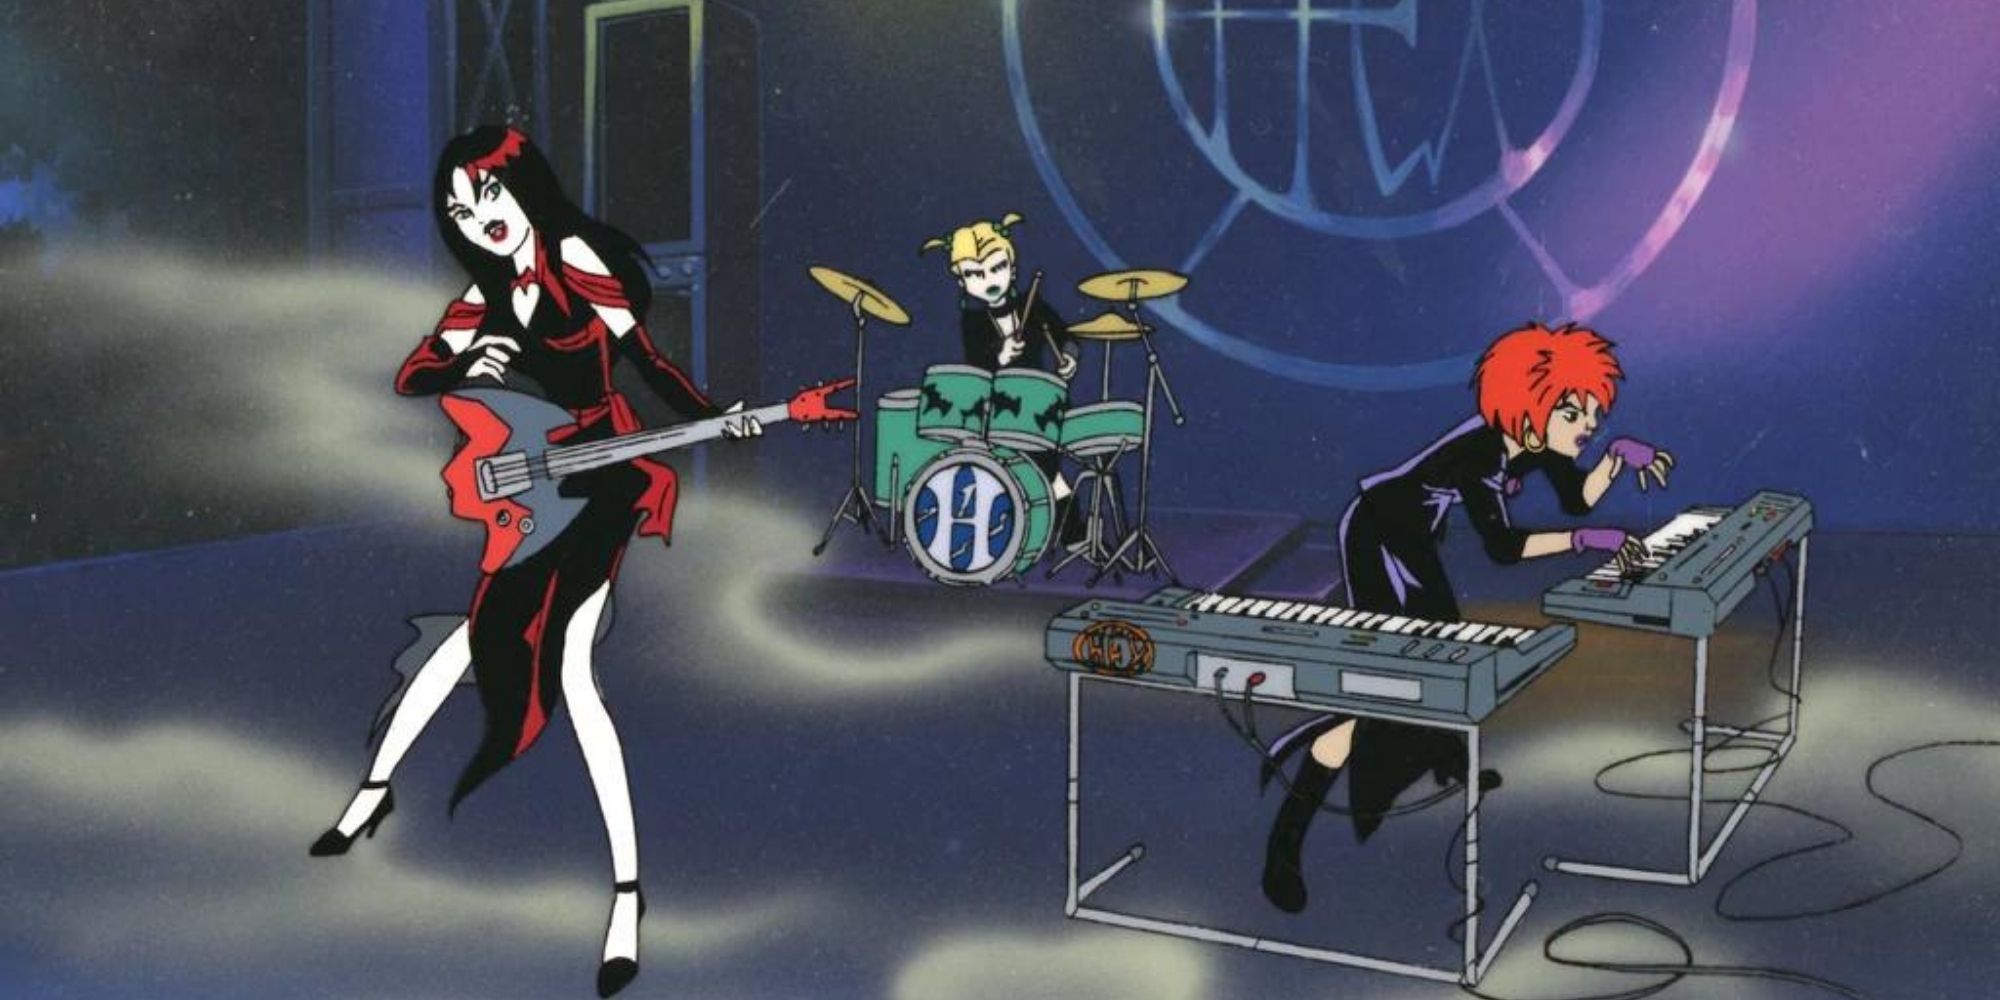 The Hex Girls concert in Scooby Doo and the Witchs Ghost